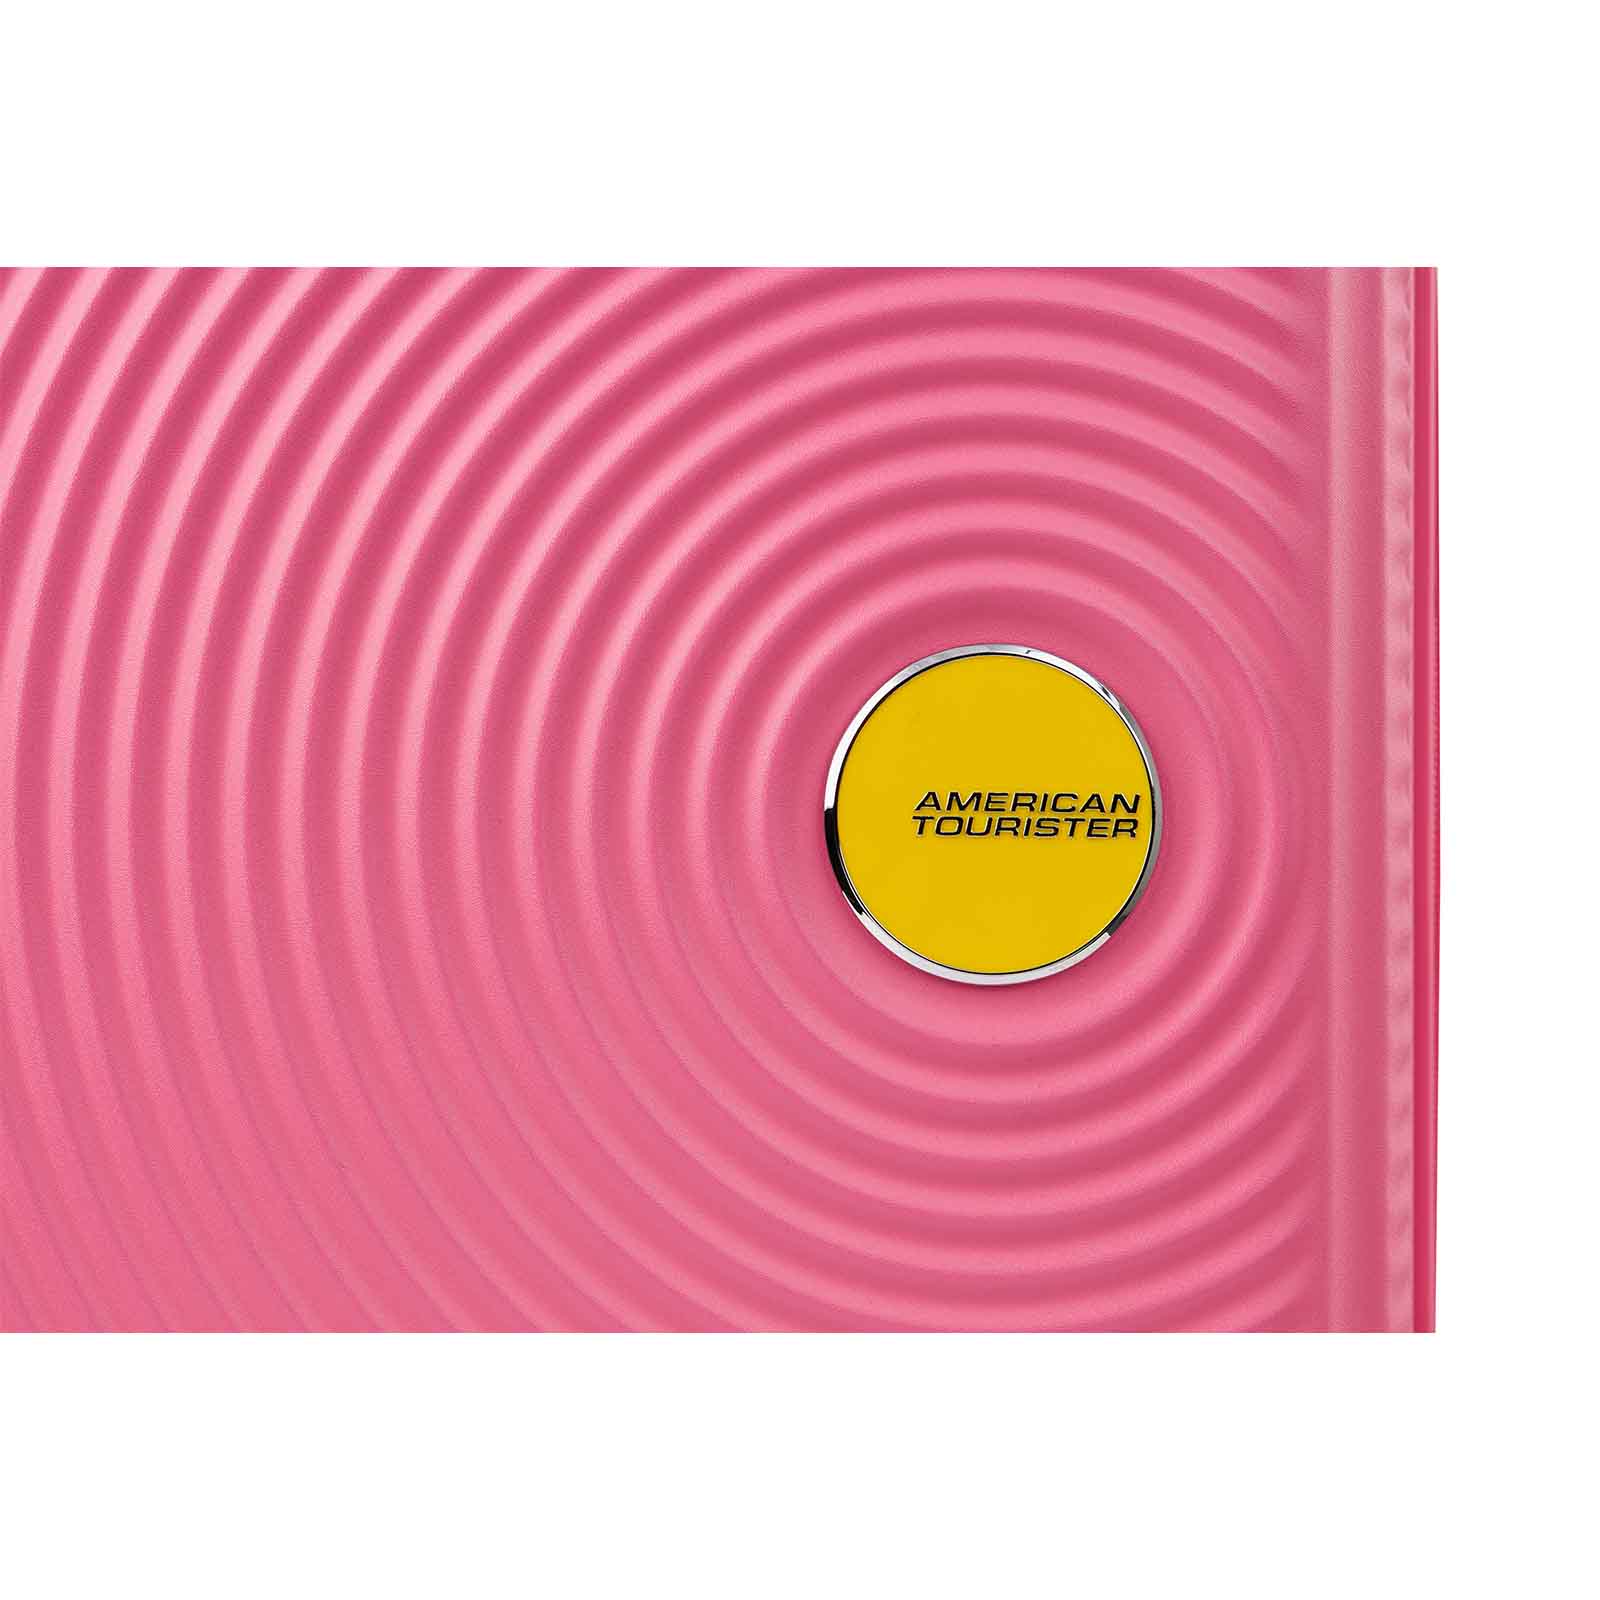 American-Tourister-Little-Curio-47cm-Carry-On-Suitcase-Pink-Yellow-Logo